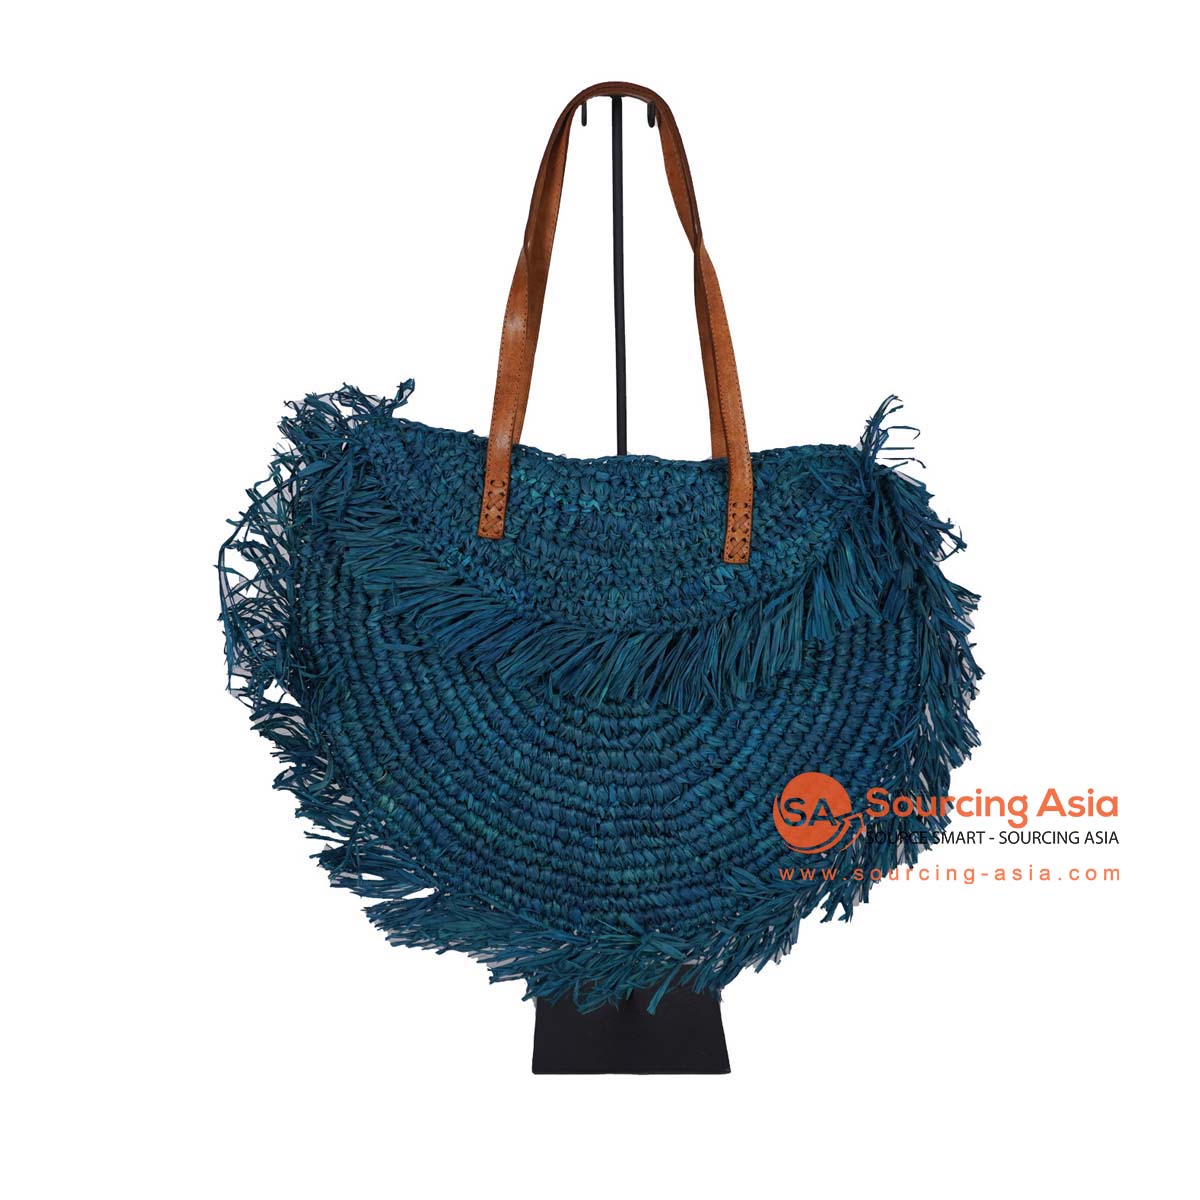 HBSC287-1 BLUE GAJIH BAG WITH FRINGE AND LEATHER HANDLE